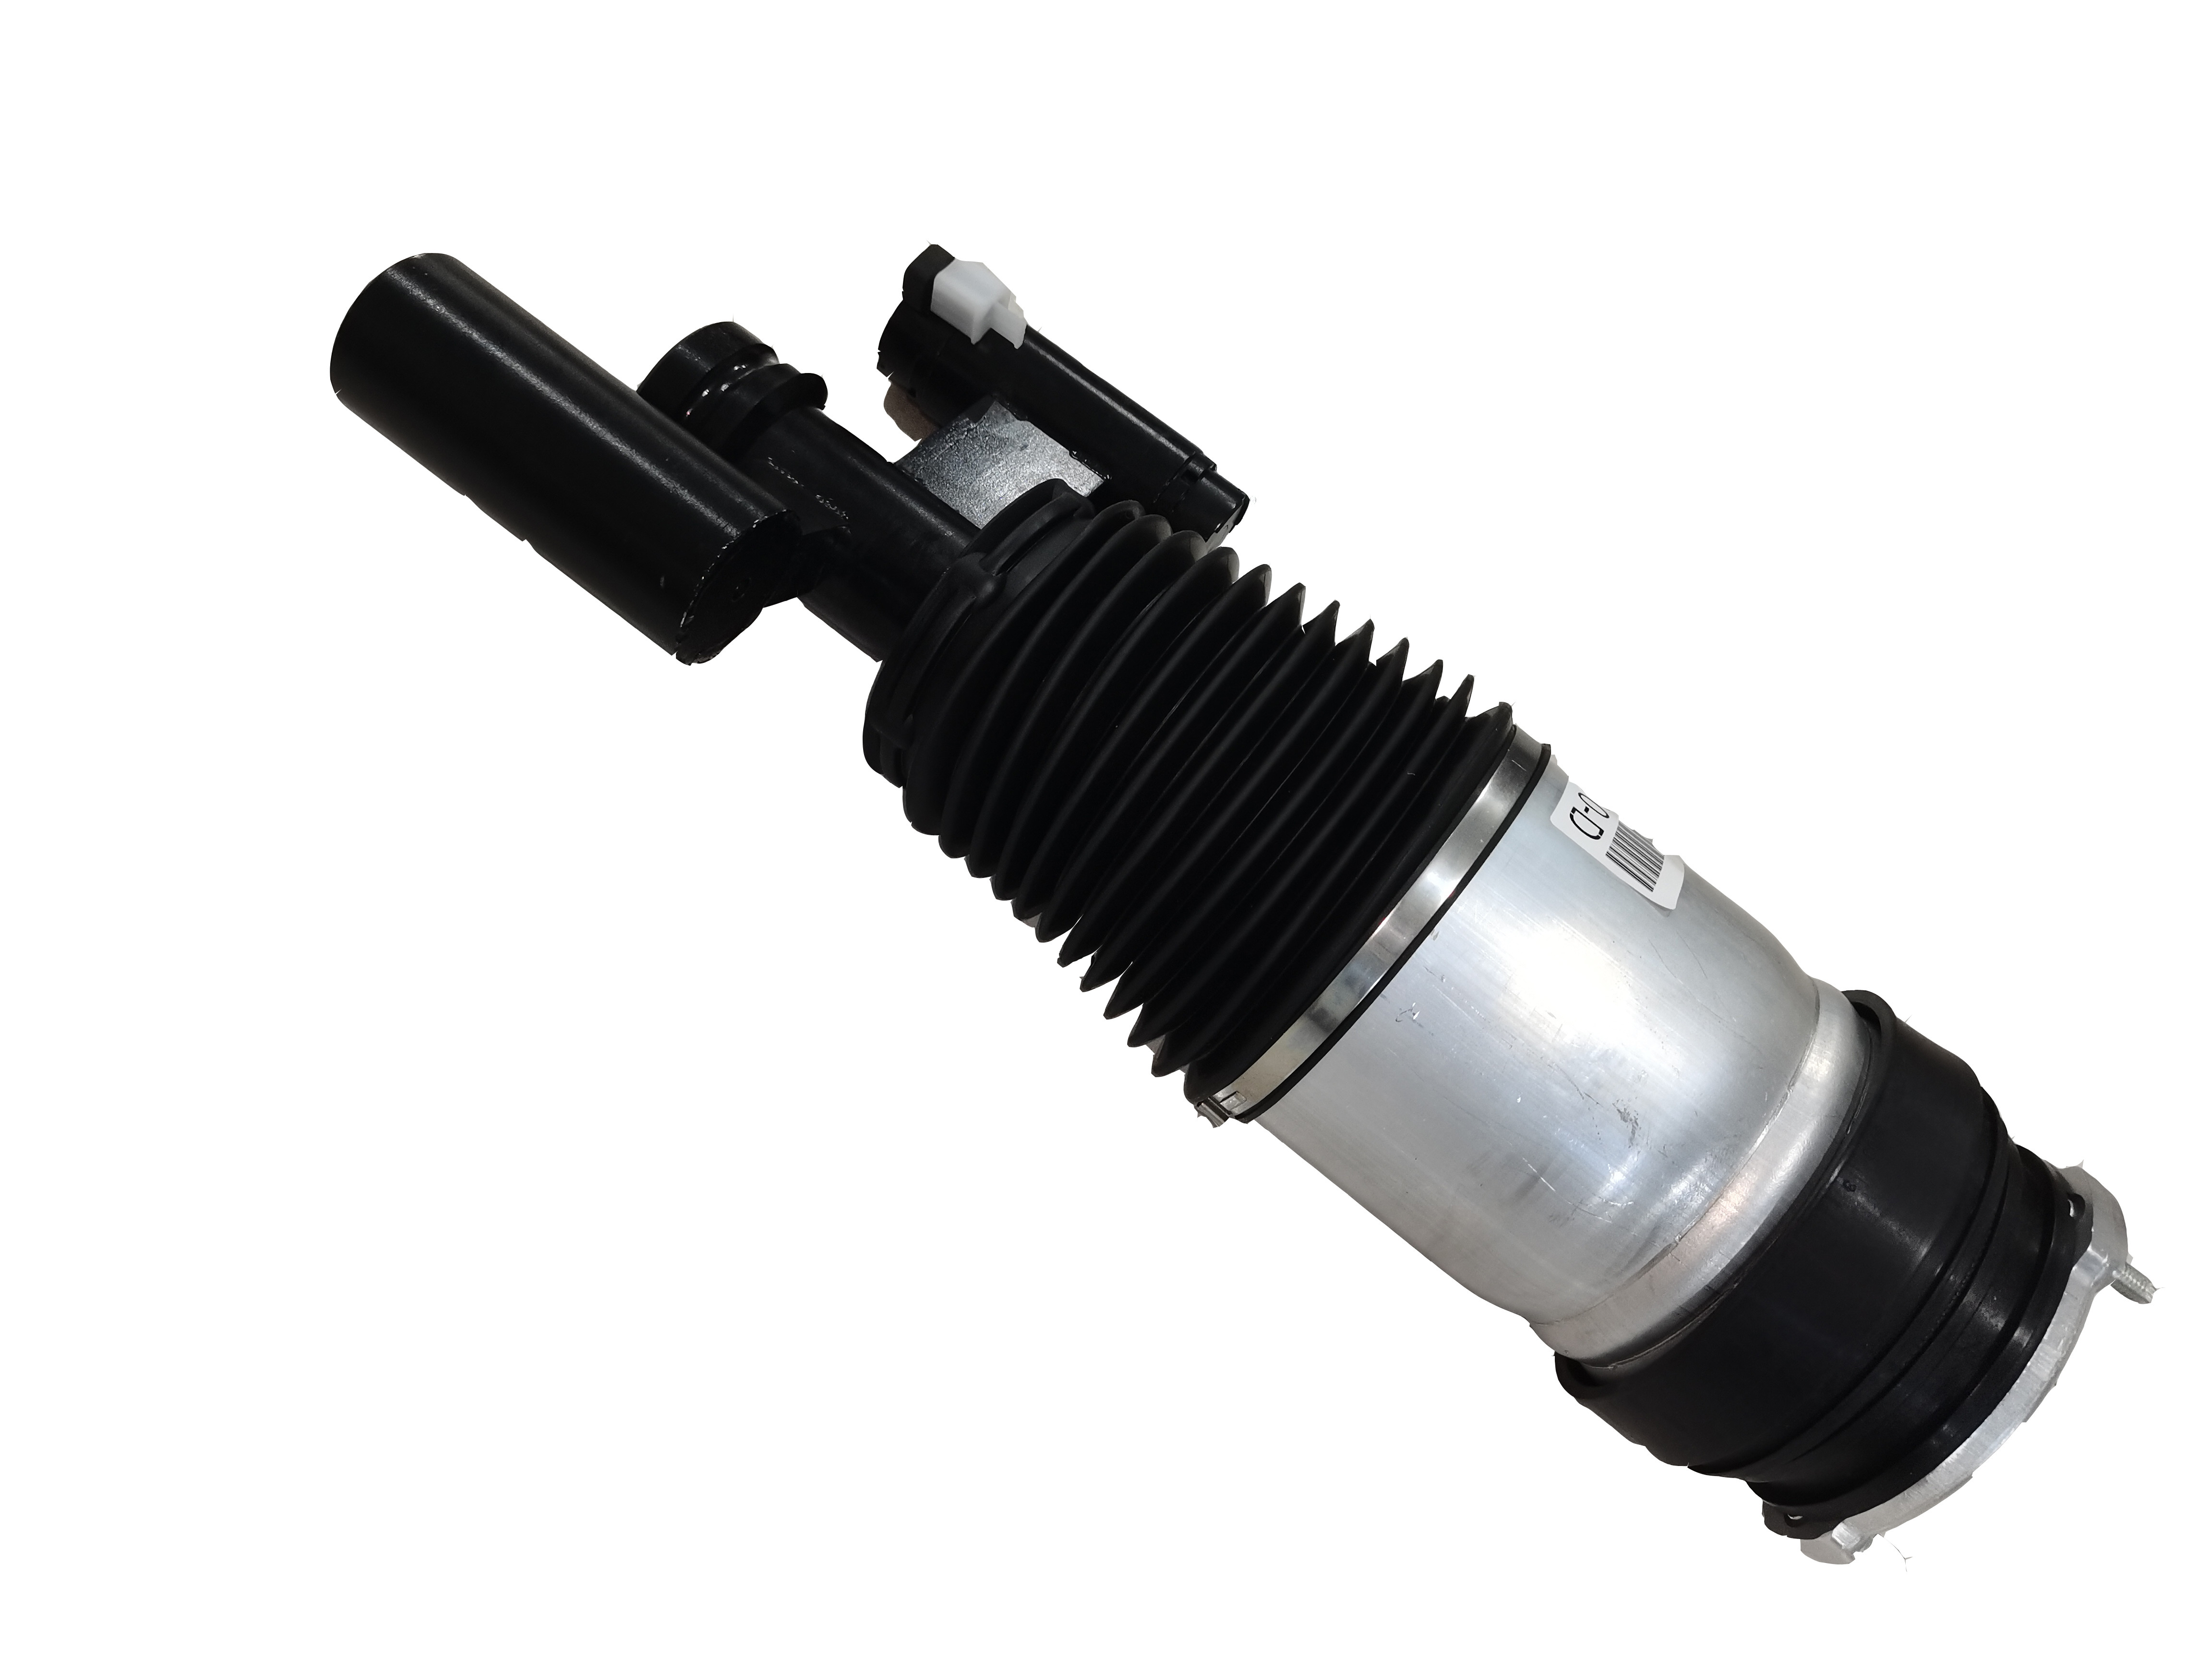 Buy cheap Rubber Front Tesla Shock Absorbers For New Model X AWD 027061-00-C from wholesalers